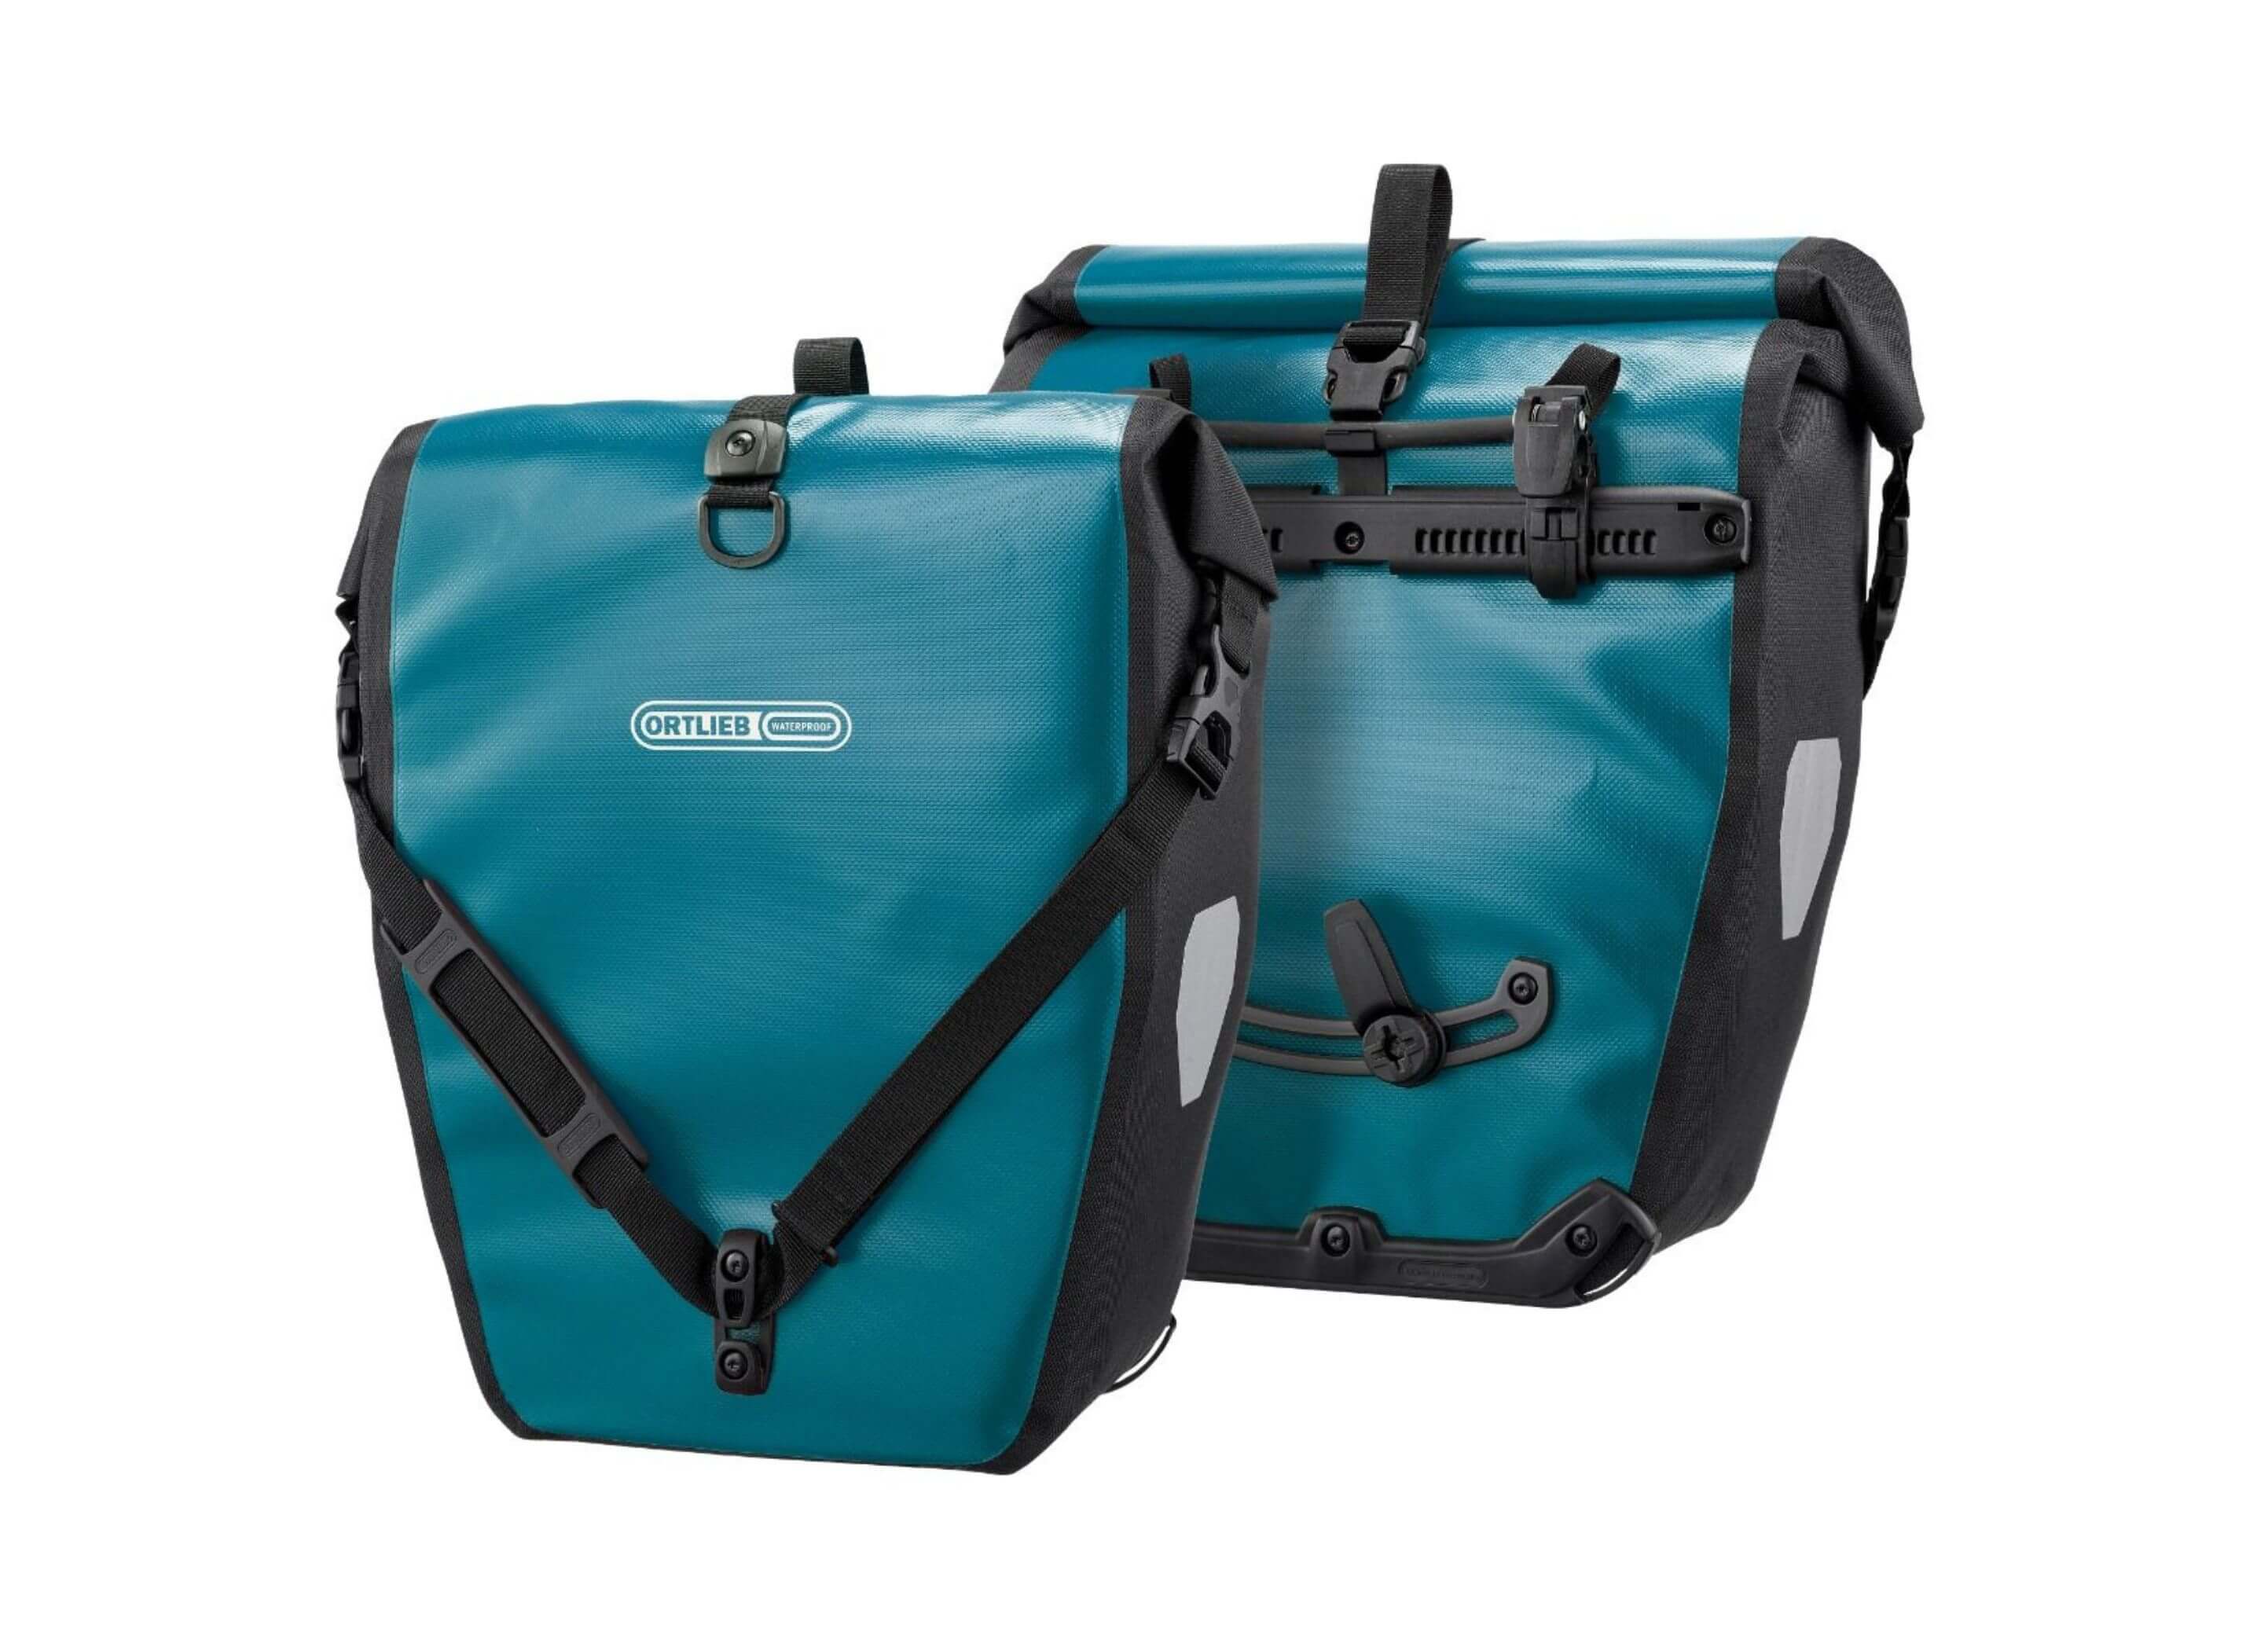 Ortlieb Back Roller Classic Pannier Bags